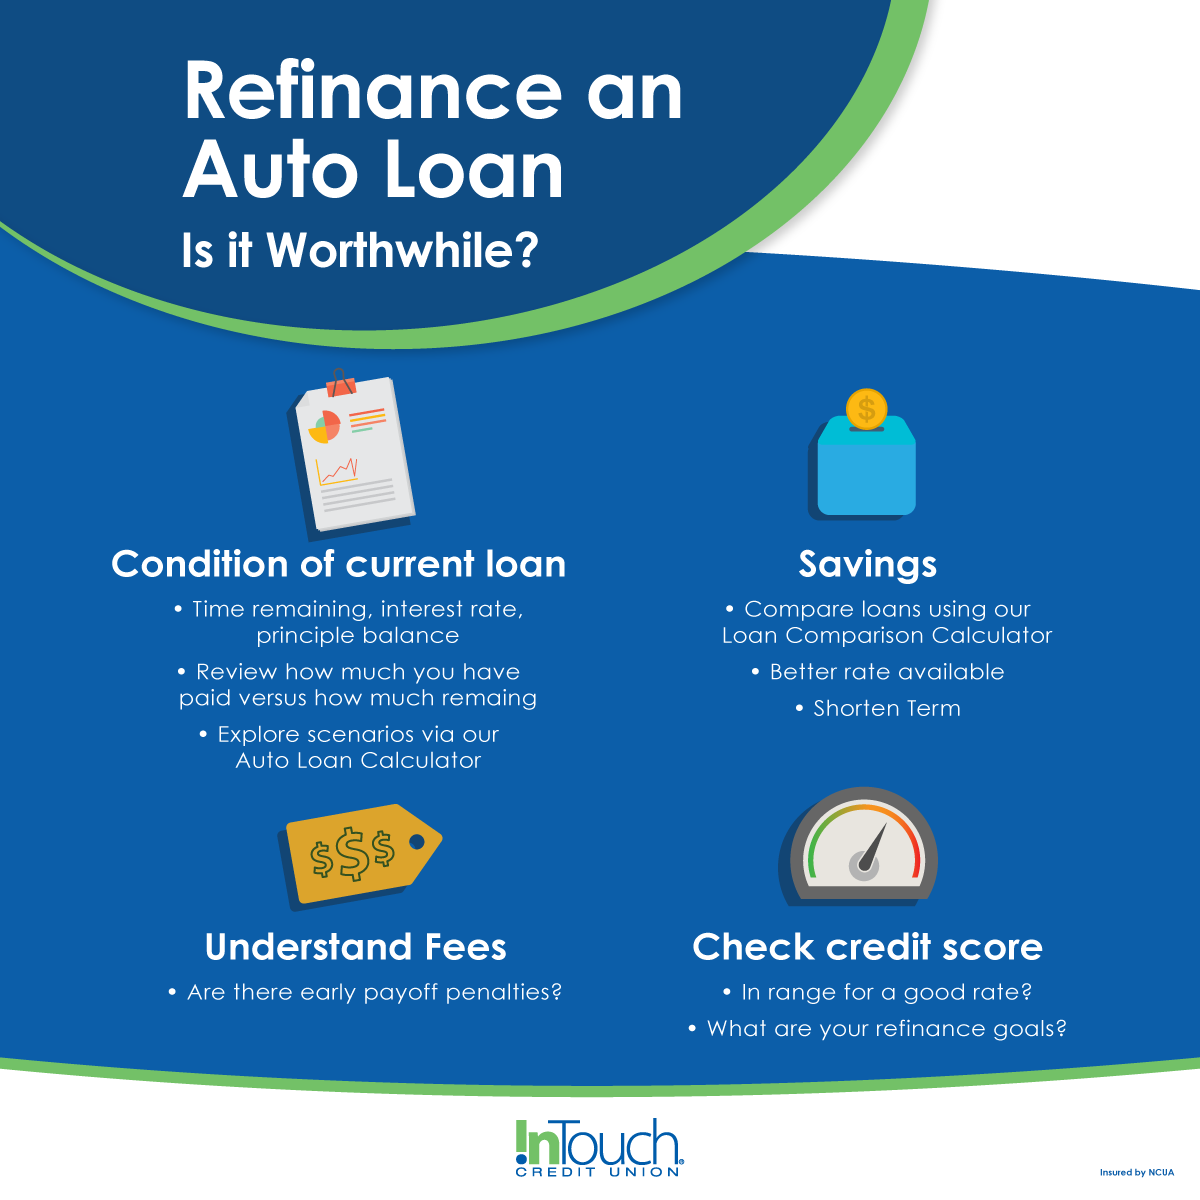 Infographic Discussing if Refinancing an Auto Loan is Worth It